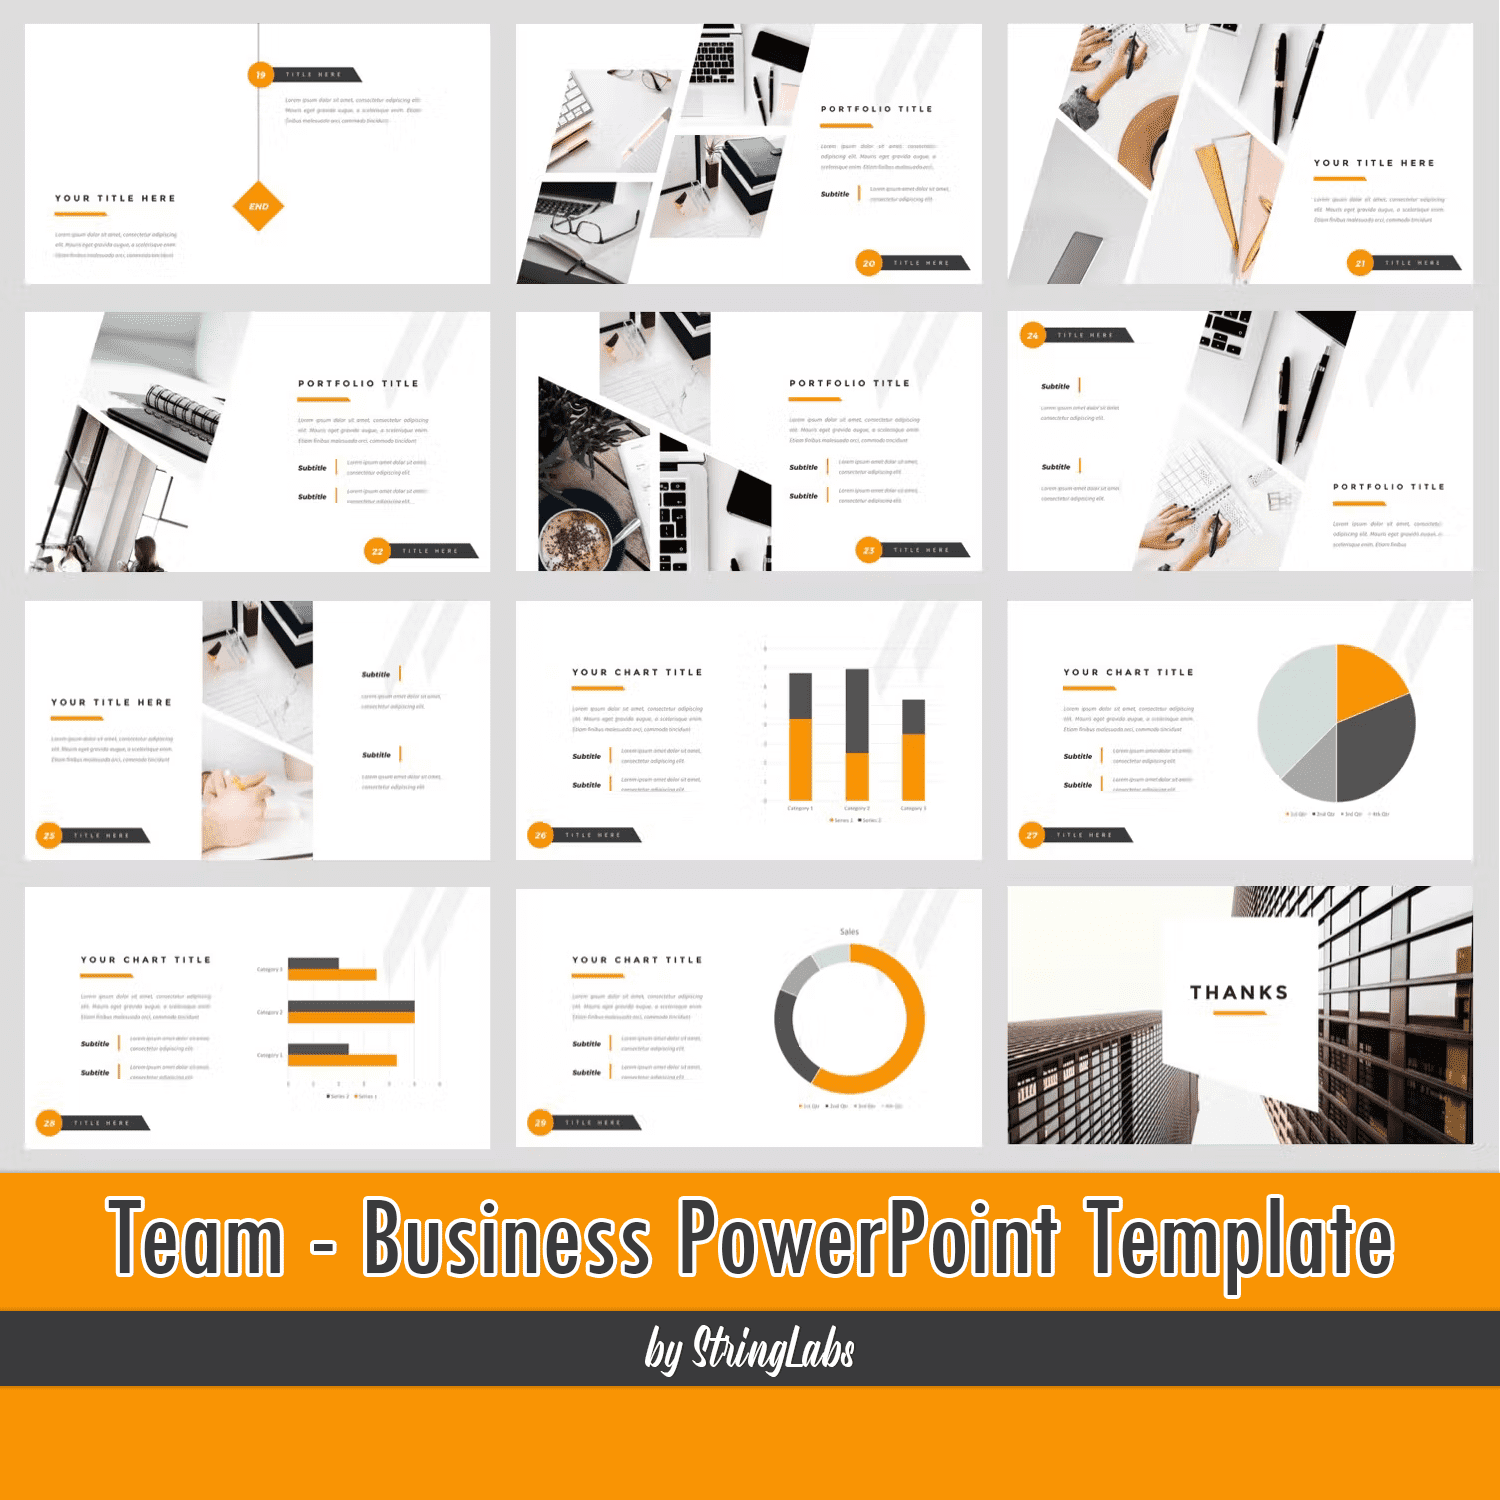 Pack of images of elegant presentation template slides on the topic of a business team.